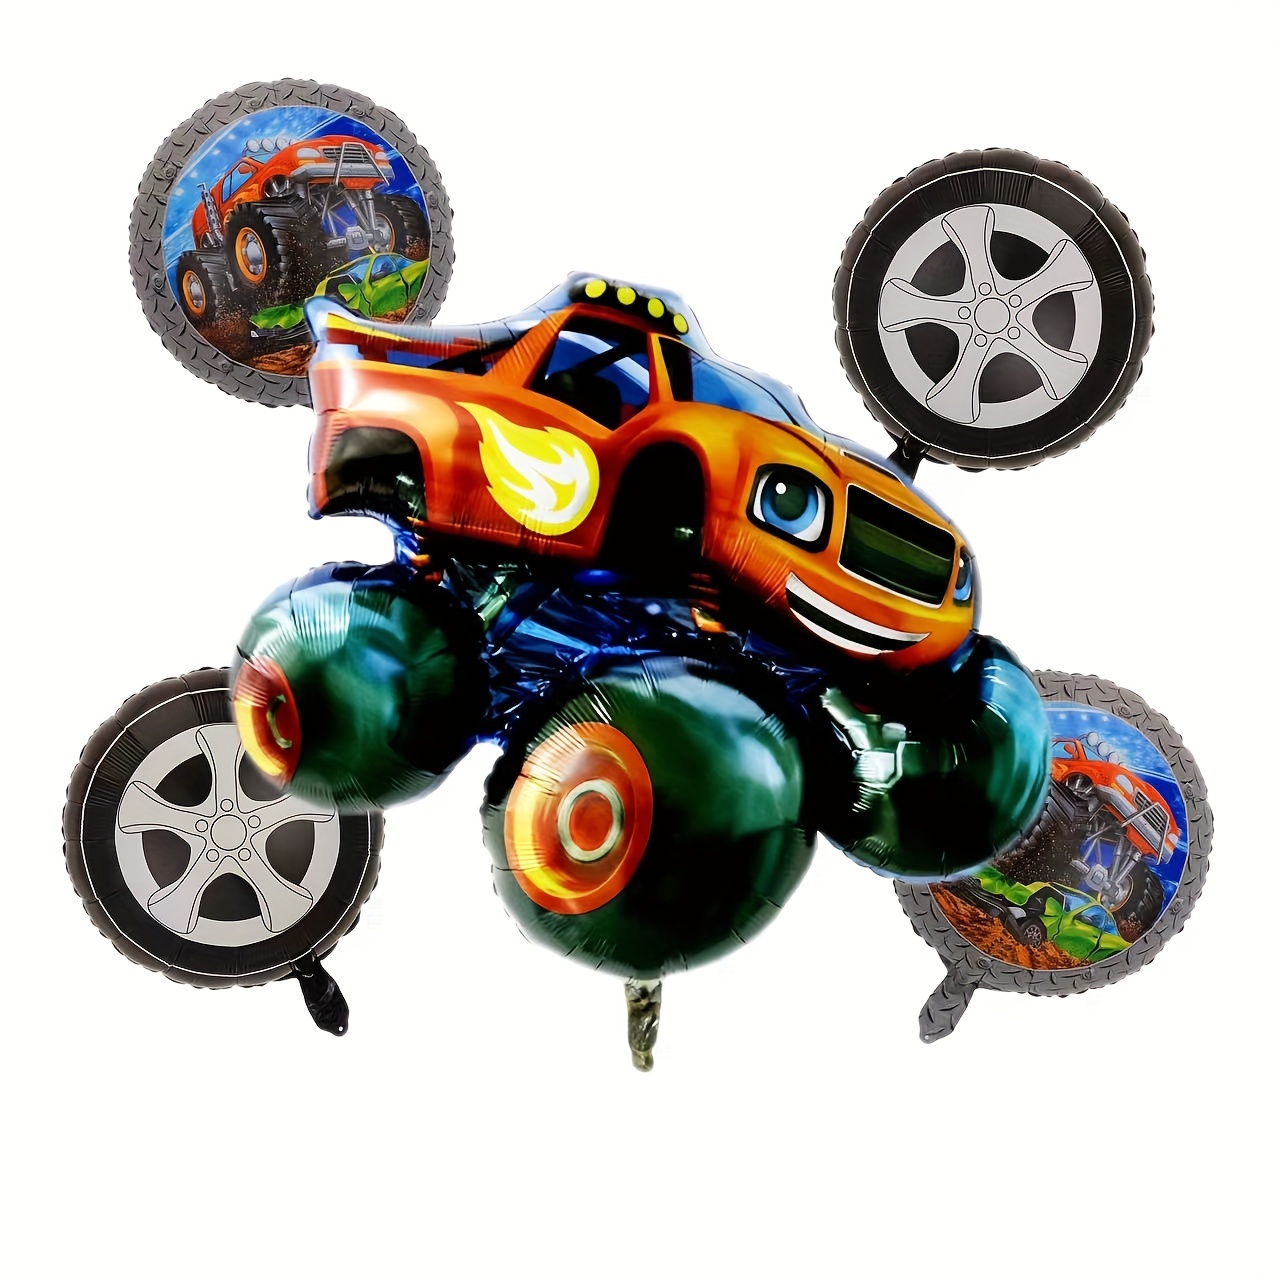 

5-piece Monster Truck Foil Balloons Set For Mardi Gras & Birthday Parties, Racing Theme Decorations For Ages 14+, No Electricity Needed, Durable Plastic Balloon Material For Home & Classroom Decor